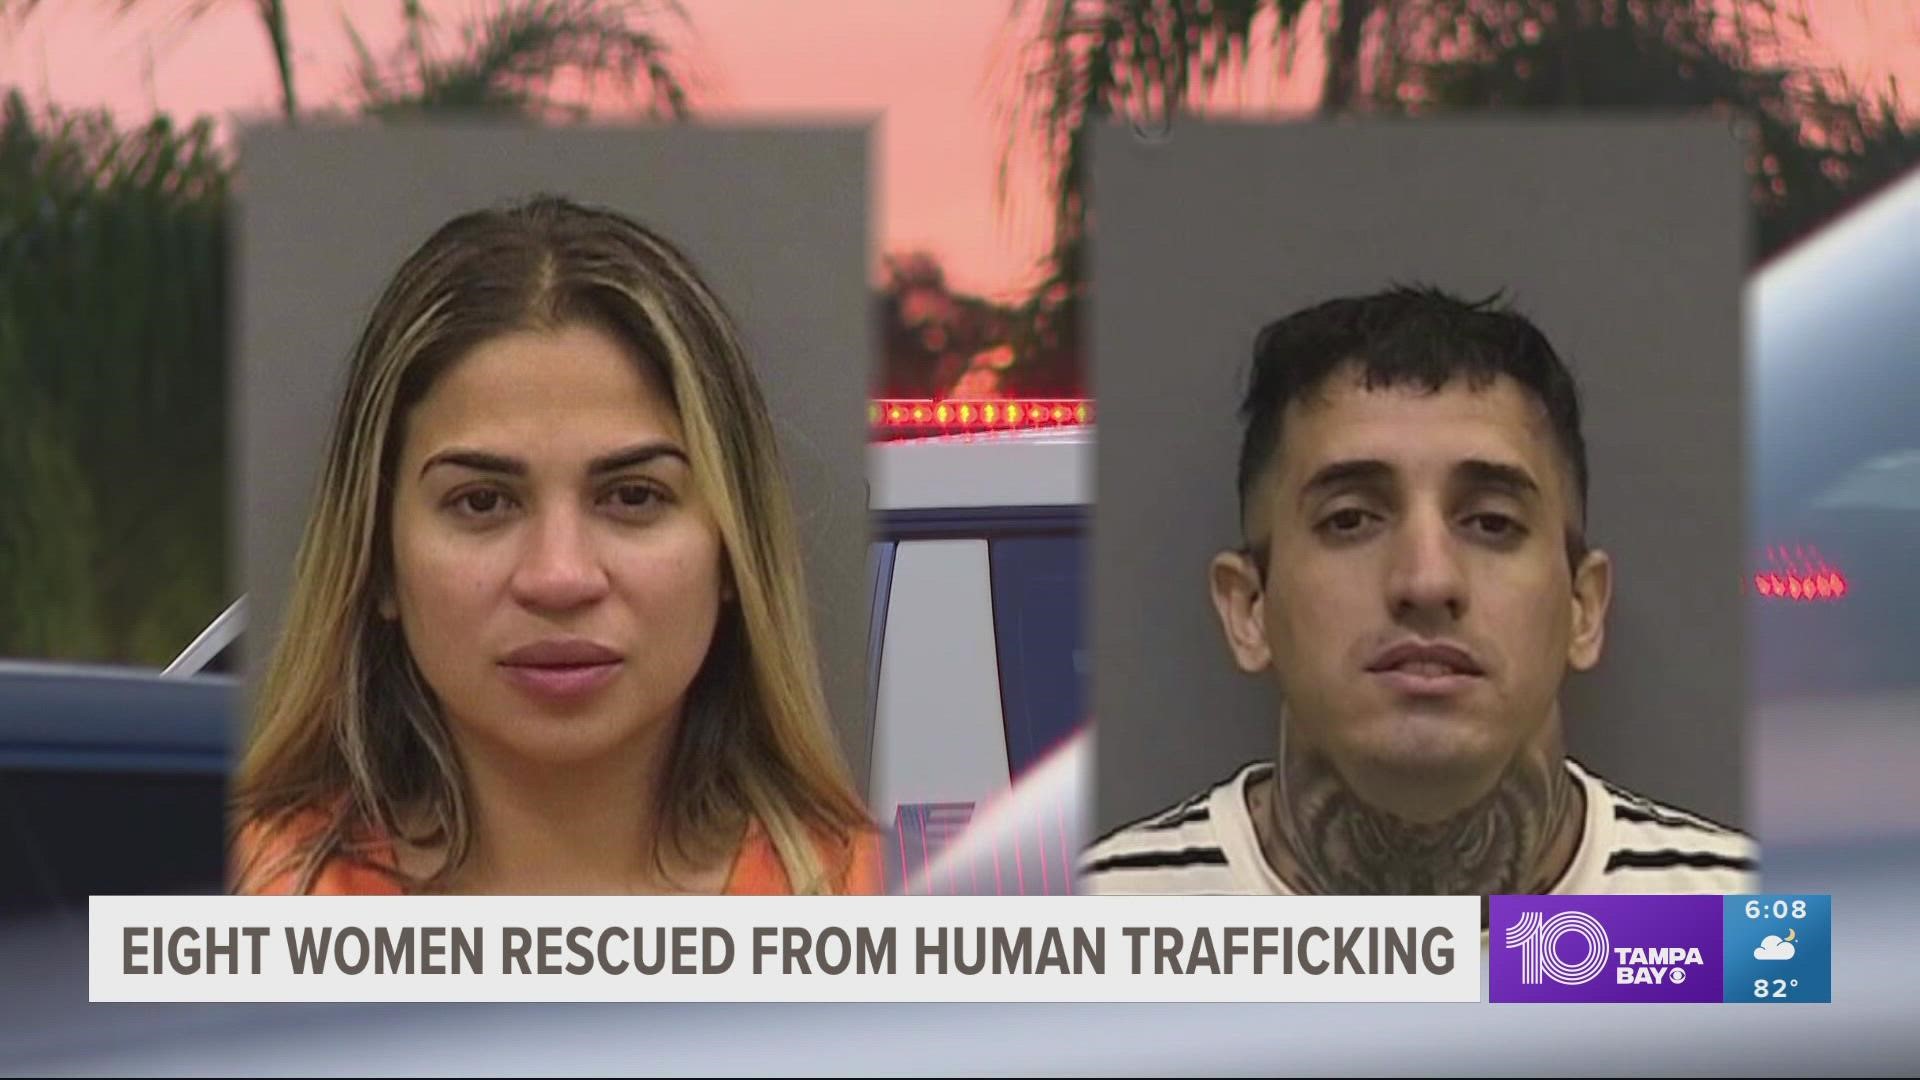 Amet Maqueira De La Cal, 35, and Rosalia Leonard Garcia, 29, were arrested and are both facing 47 charges total, including human trafficking charges.